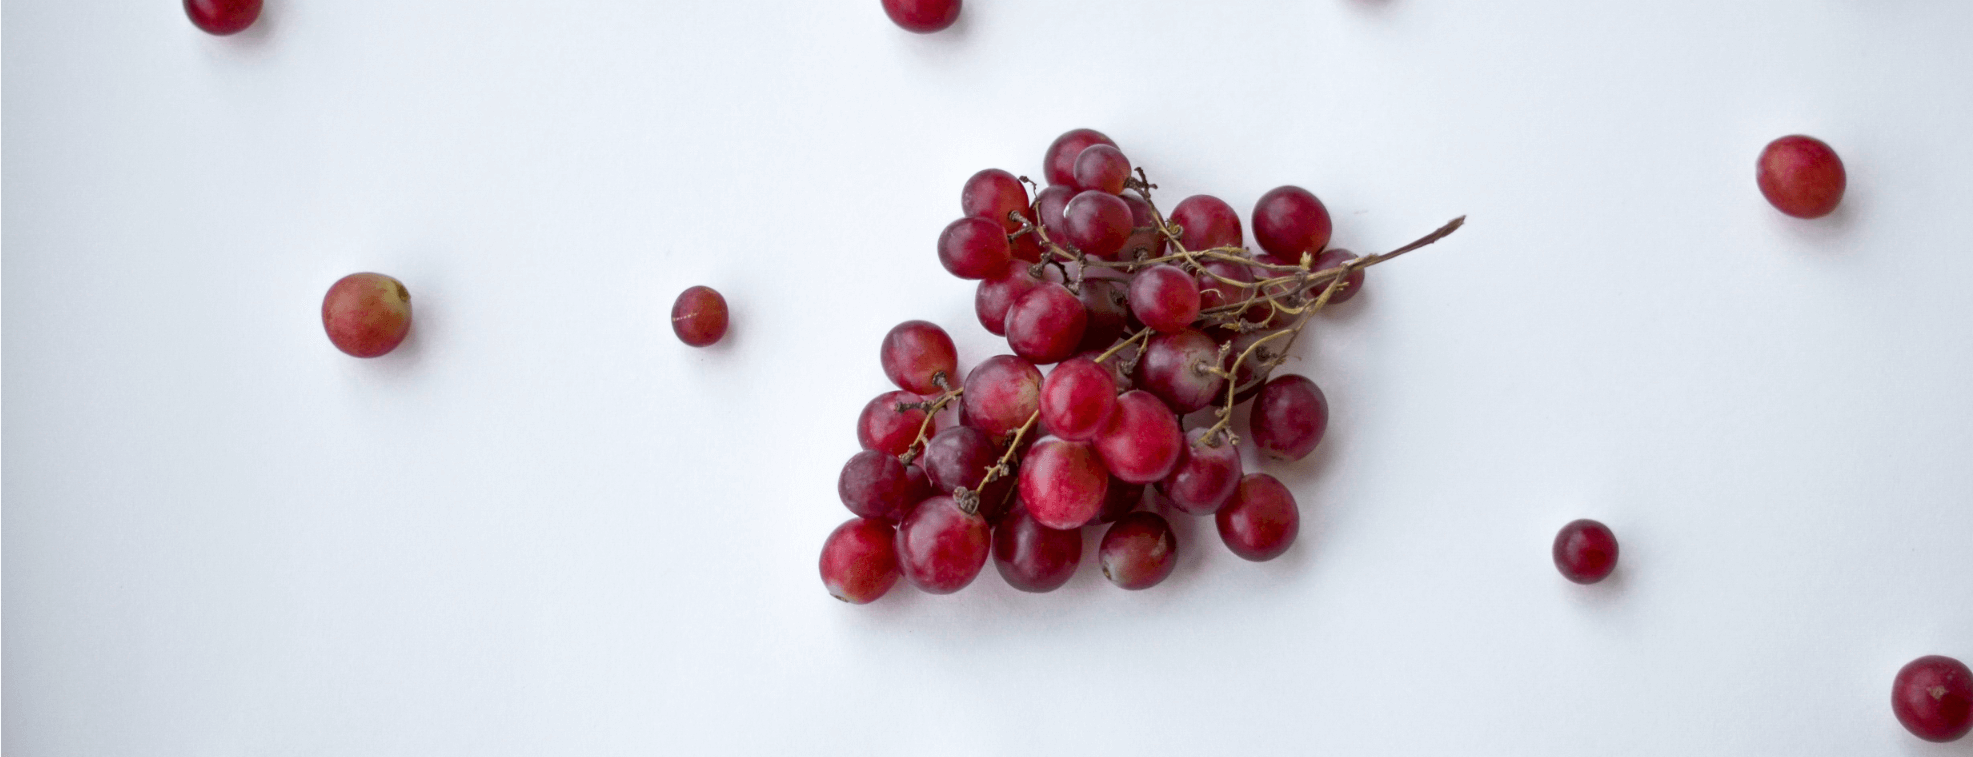 Red grapes on a white table